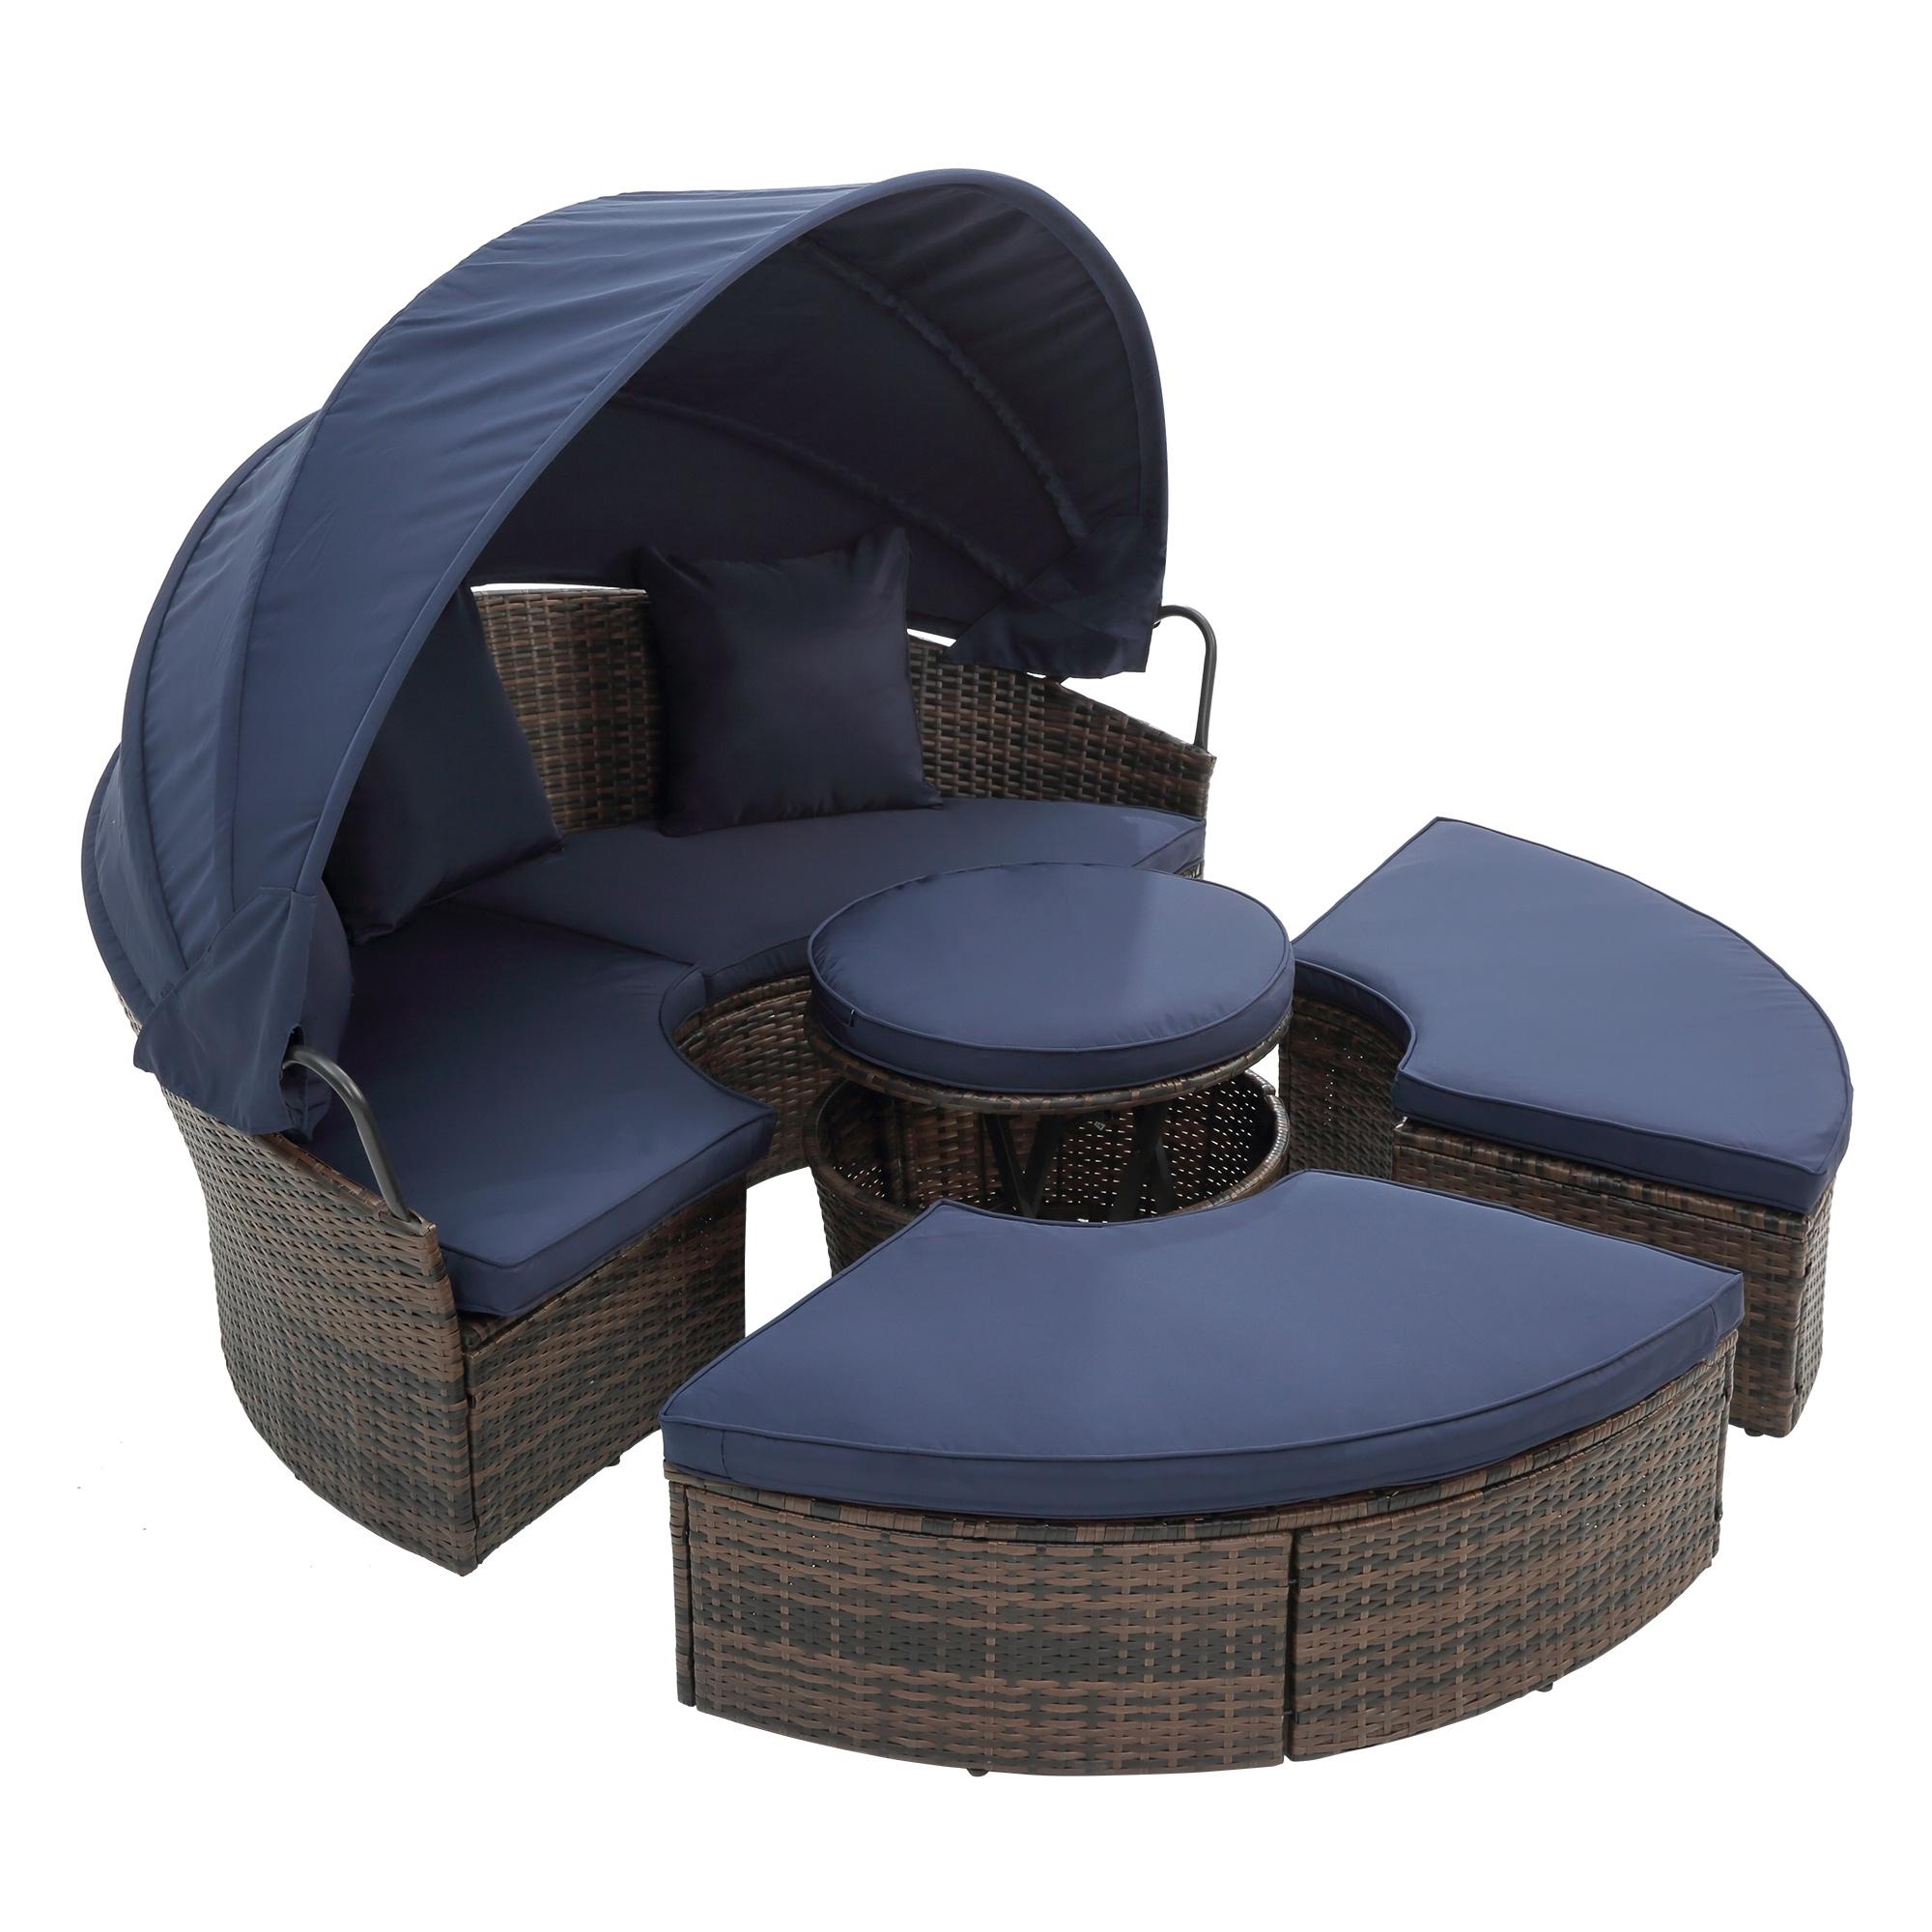 SYNGAR 6 Pieces Patio Furniture Set, Outdoor Wicker Sunbed Daybed with Canopy, Cushioned Sectional Sofa Set, Backyard Conversation Set with Coffee Table, for Poolside, Lawn, Deck, Garden, Blue, D6312 - image 3 of 9